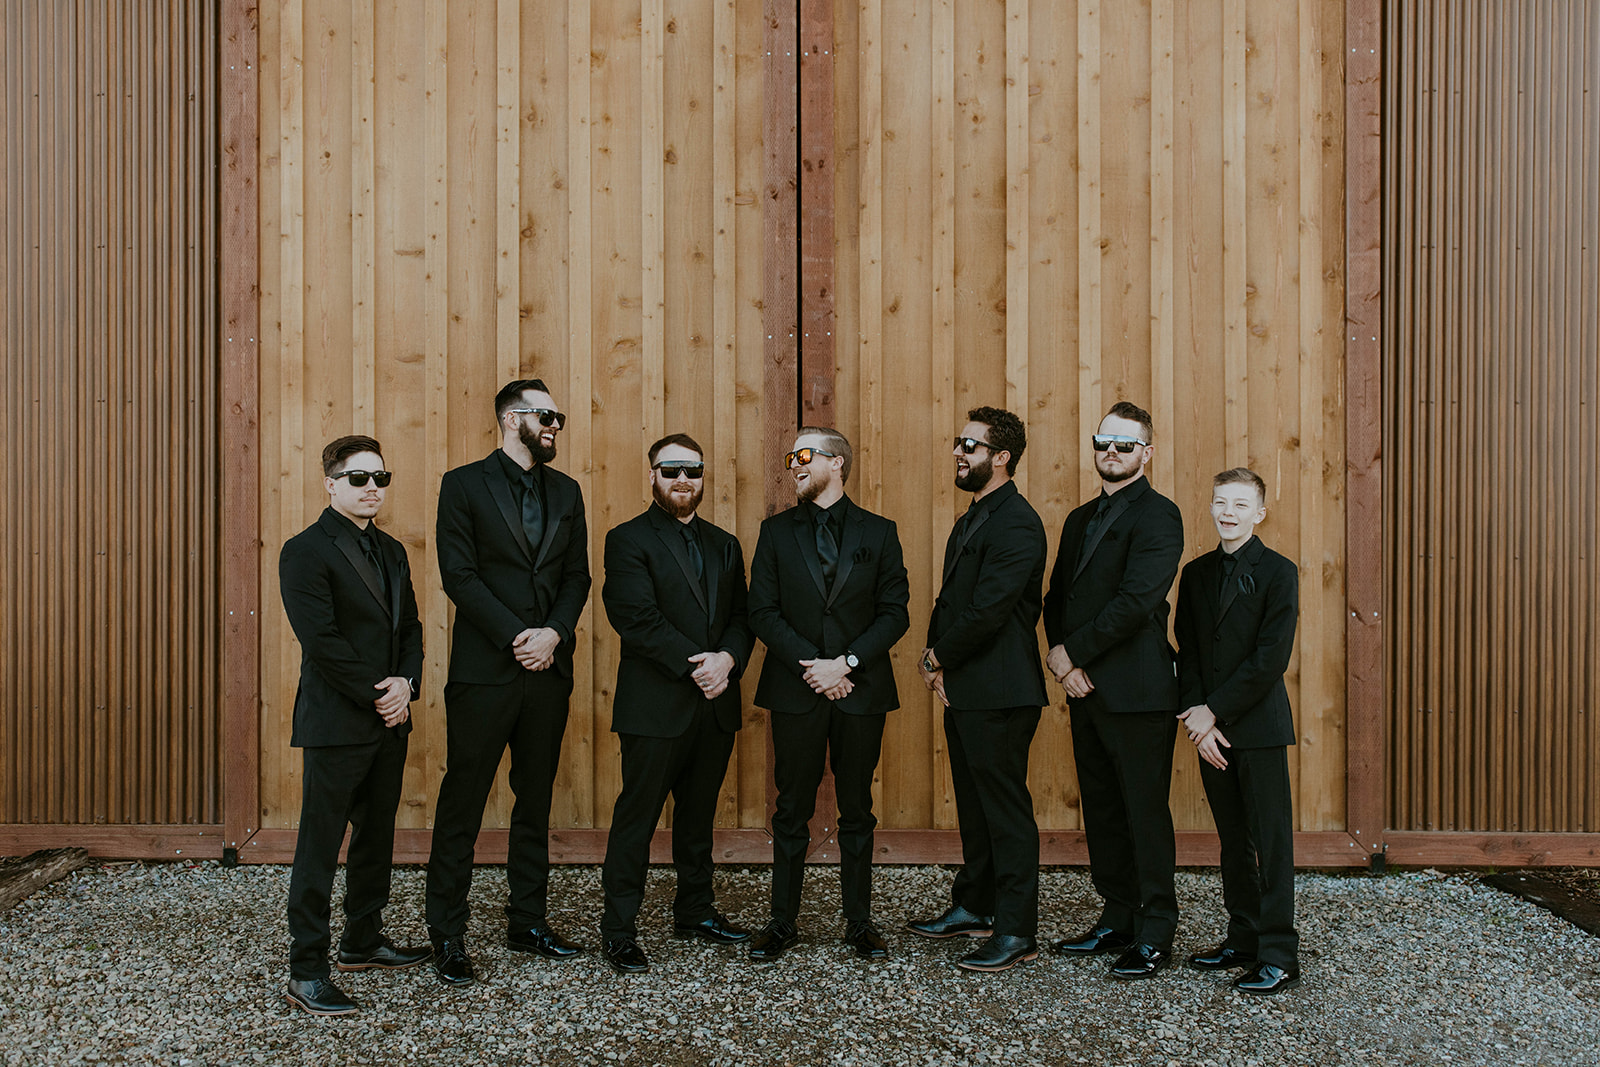 a groom and his groomsmen pose in all black wedding suits during a western winter wedding in california. photo by codi baer photography
